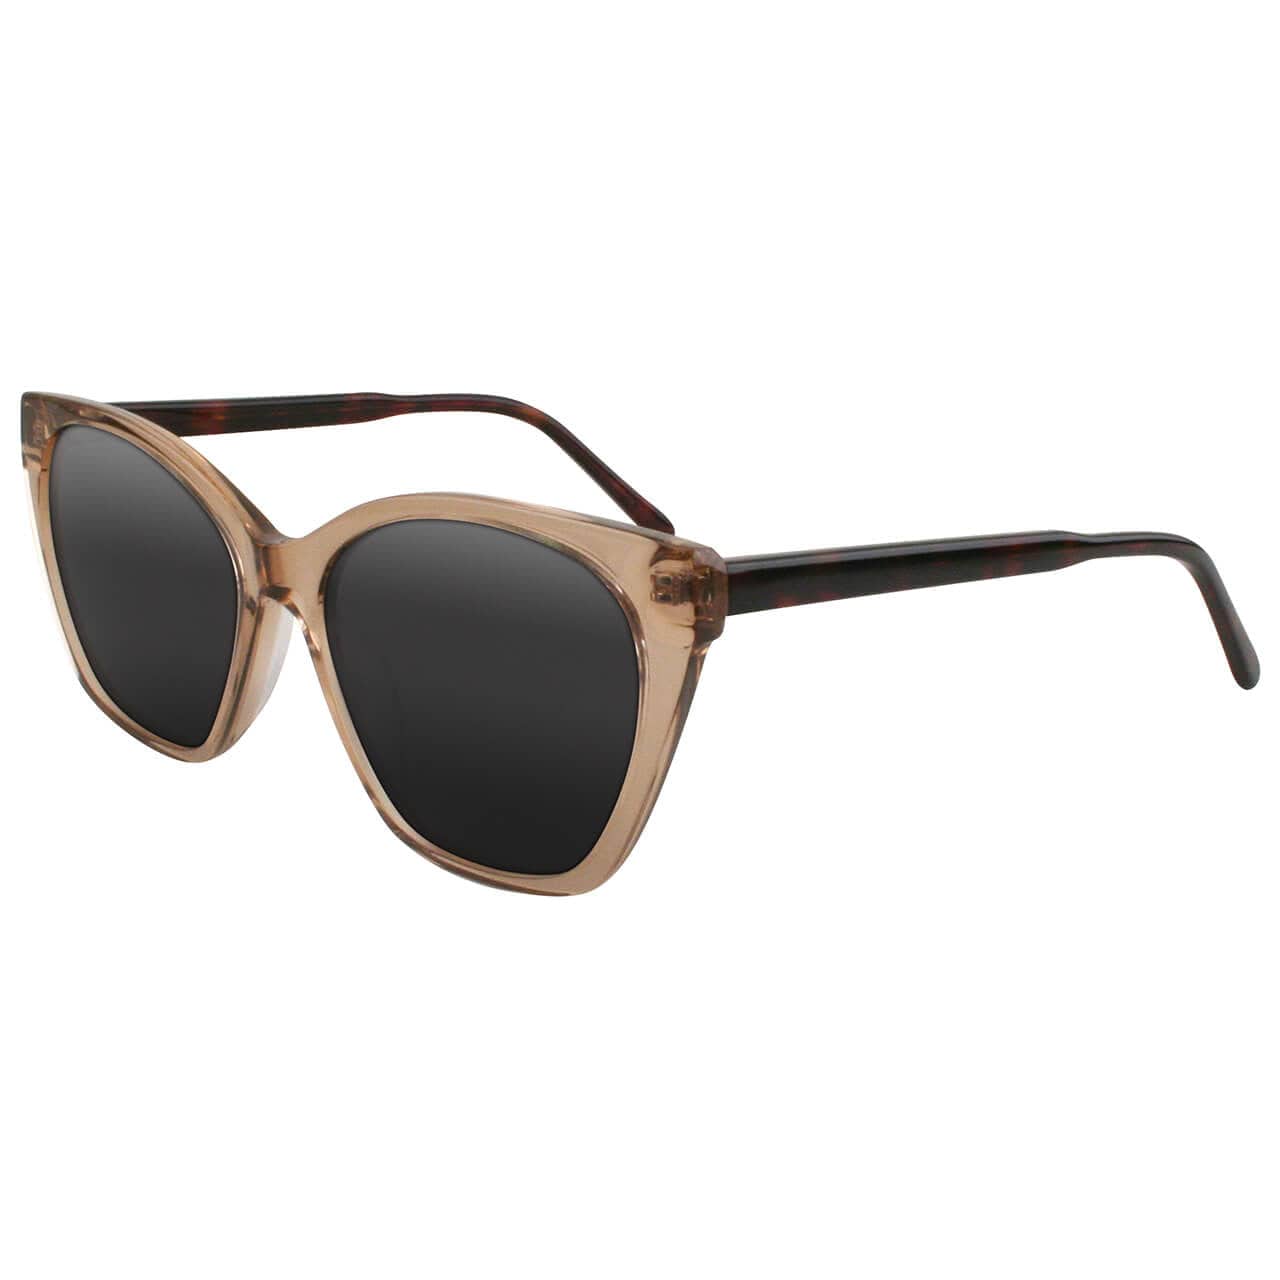 Solect Hydro Sunglasses with Brown Frame and Gray Polarized Lenses